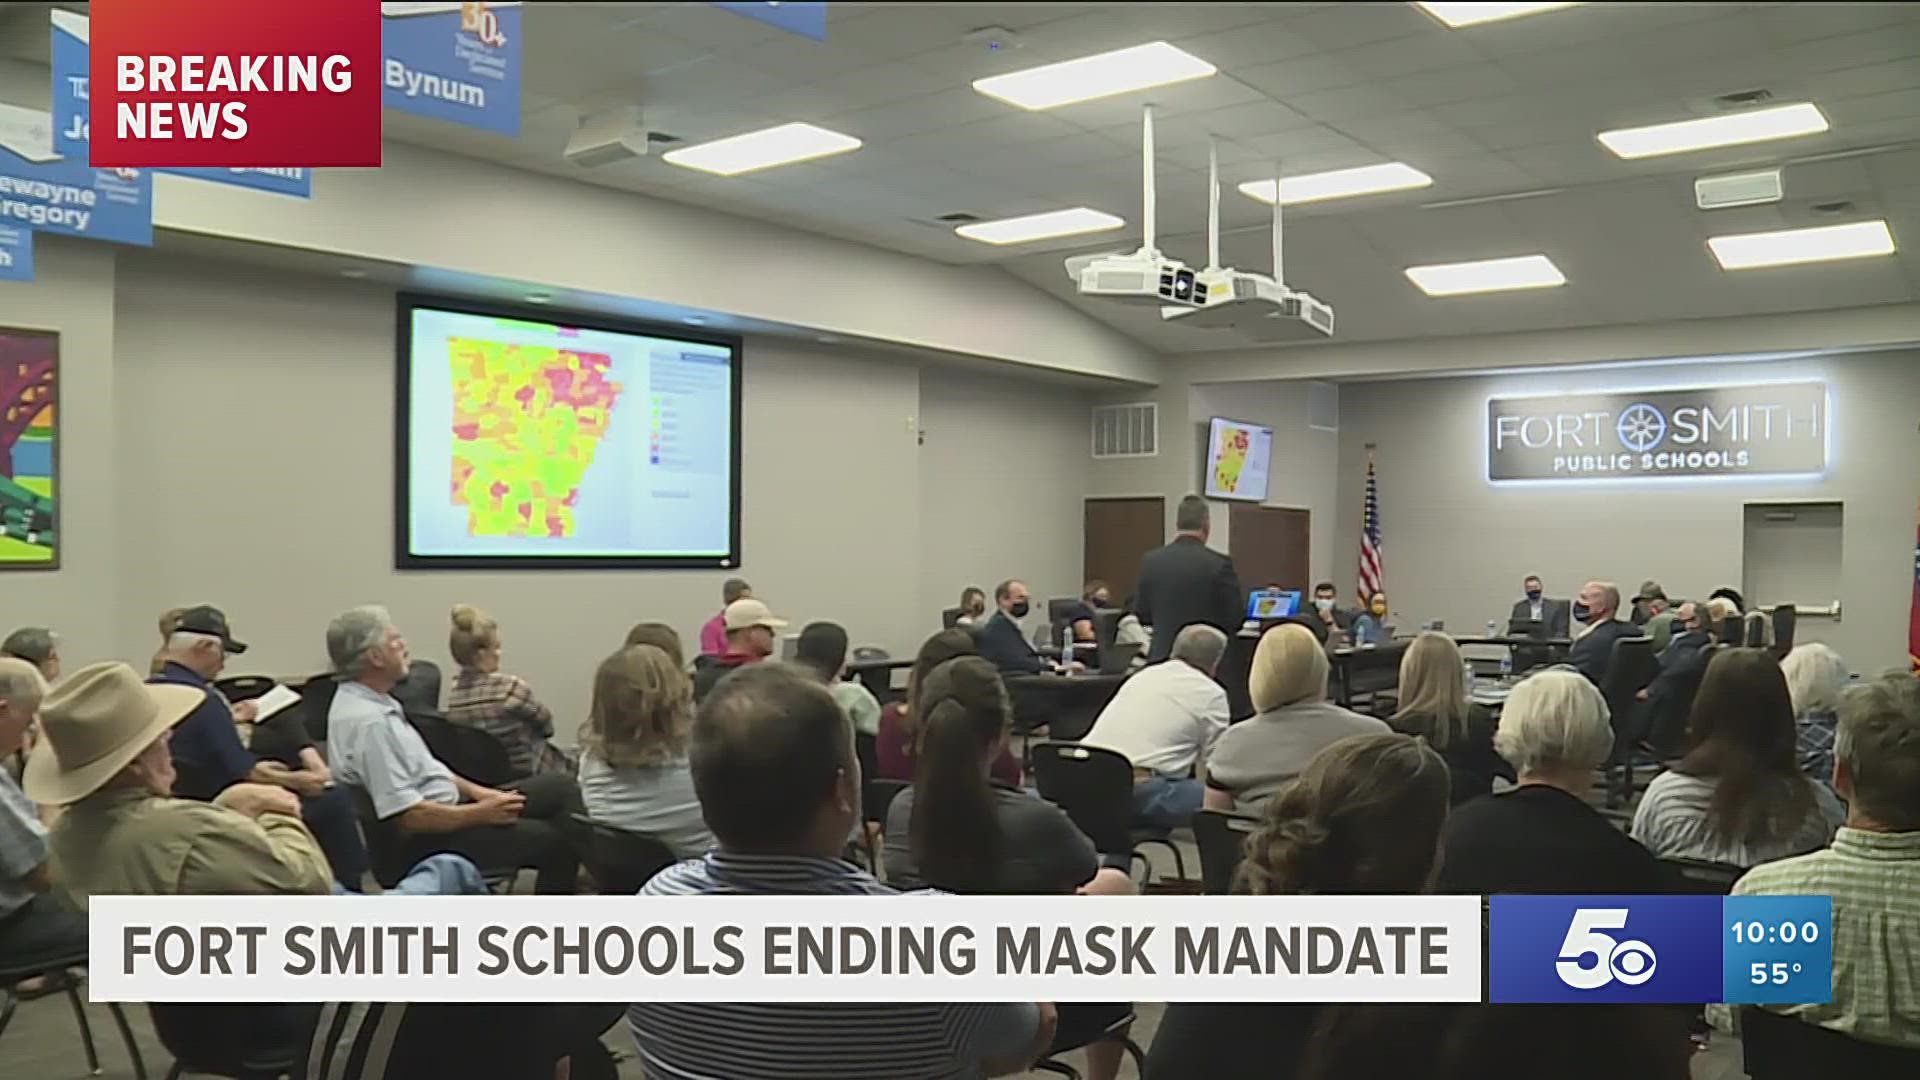 The Fort Smith Board of Education has voted to lift the mask mandate for students, teachers and staff.